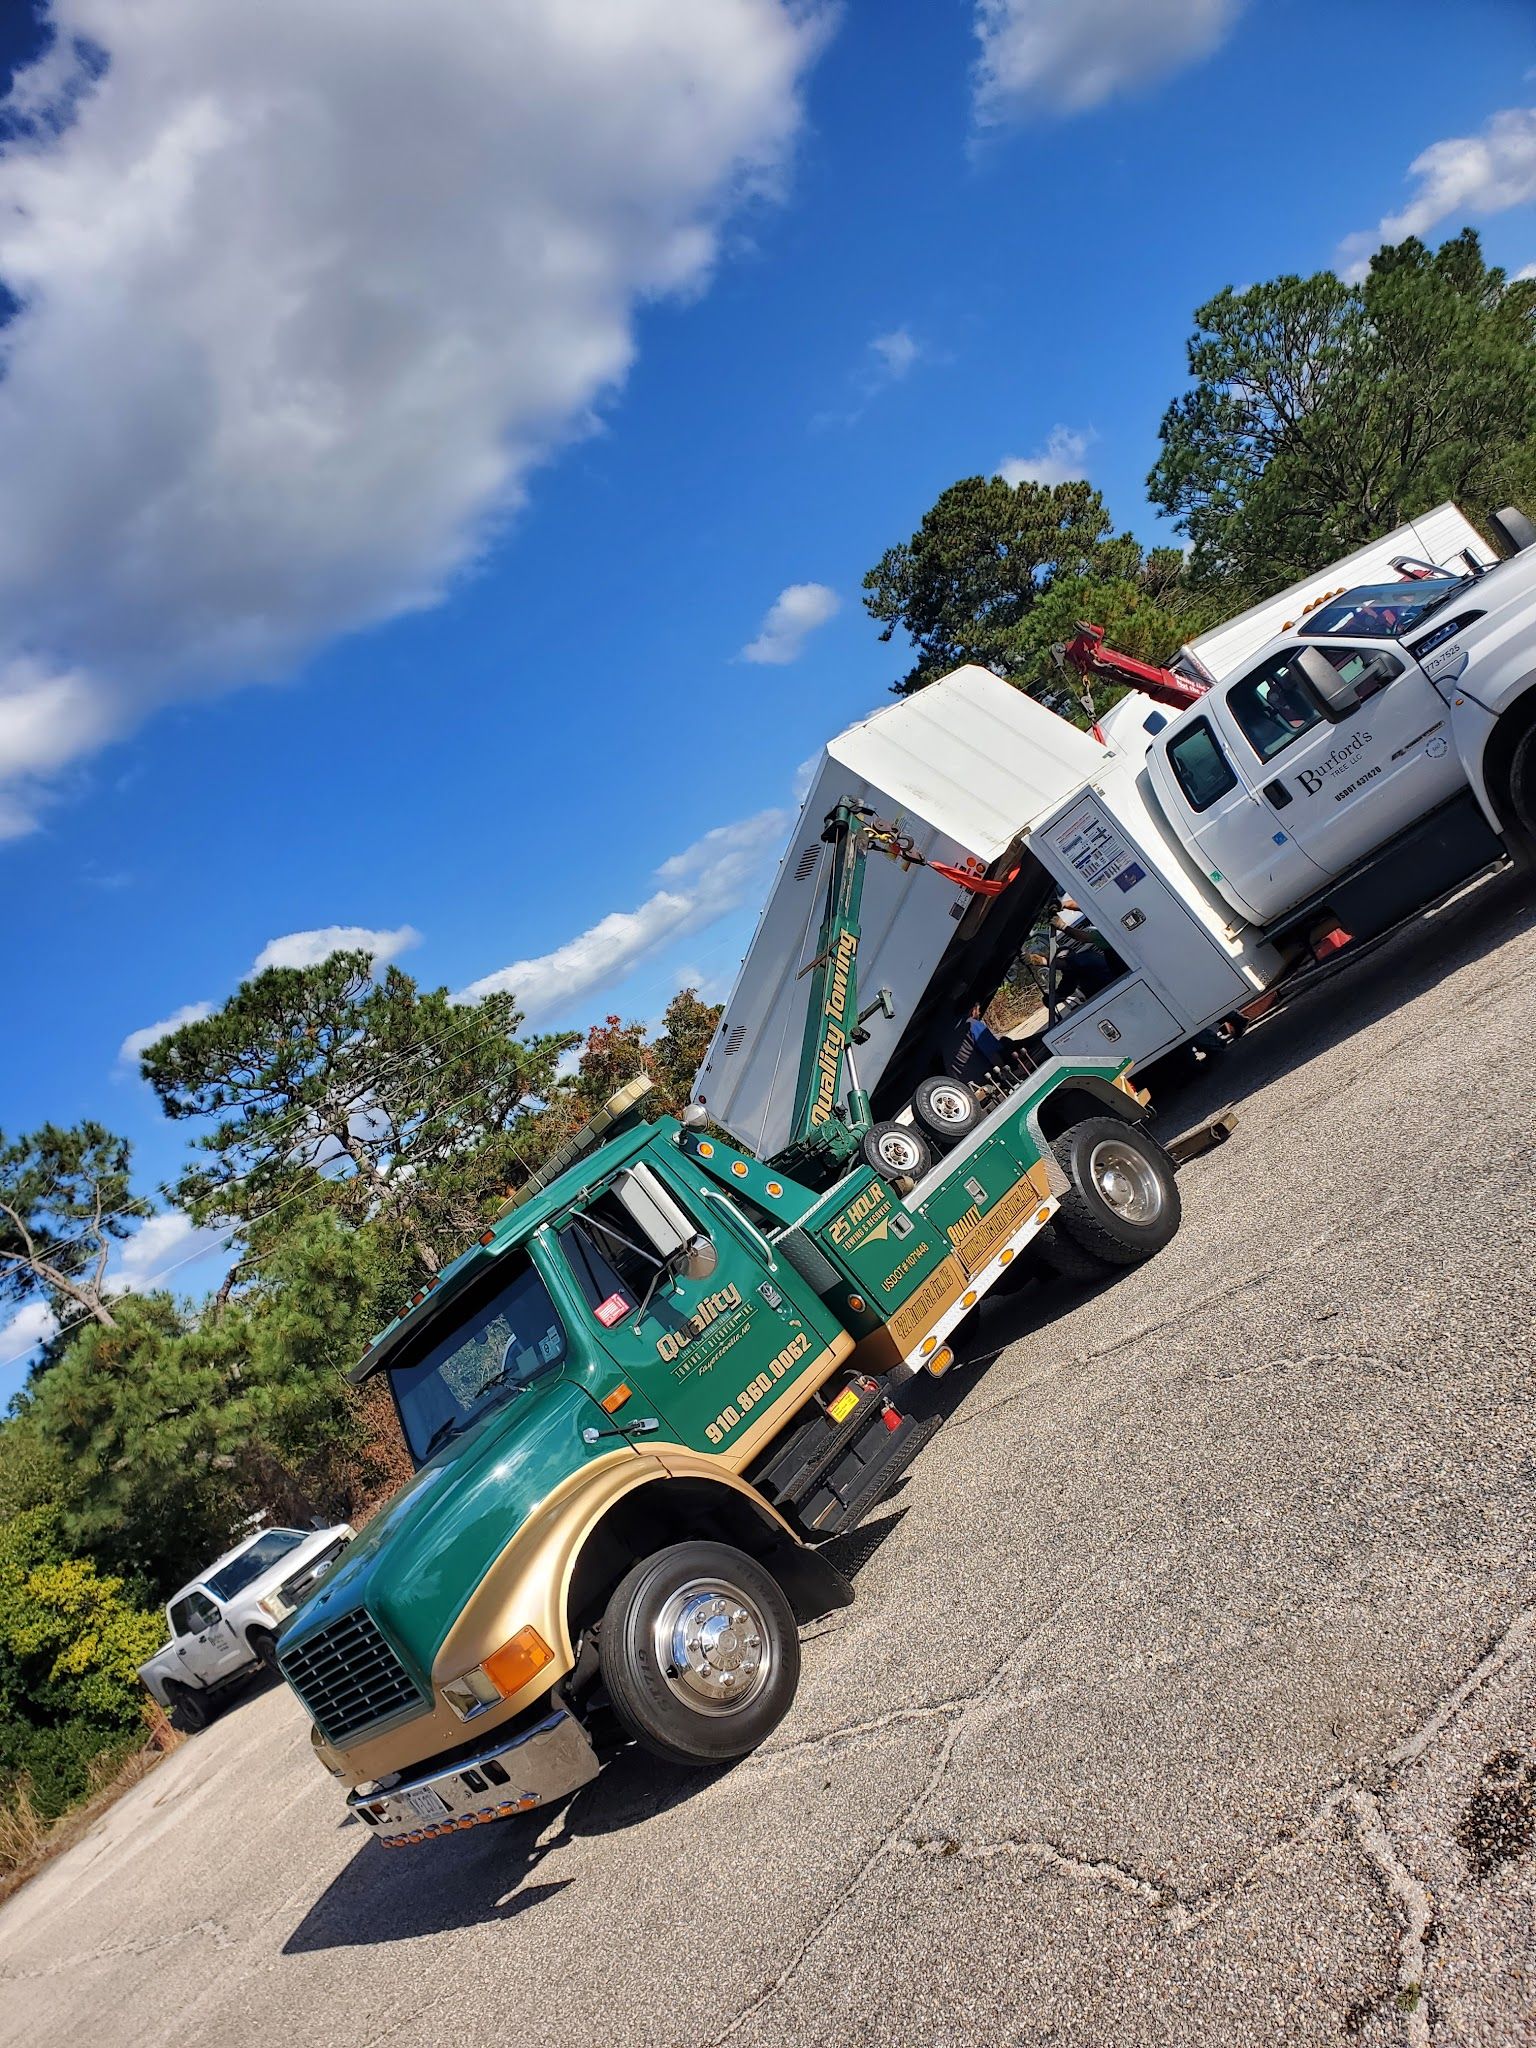 Quality Towing & Recovery